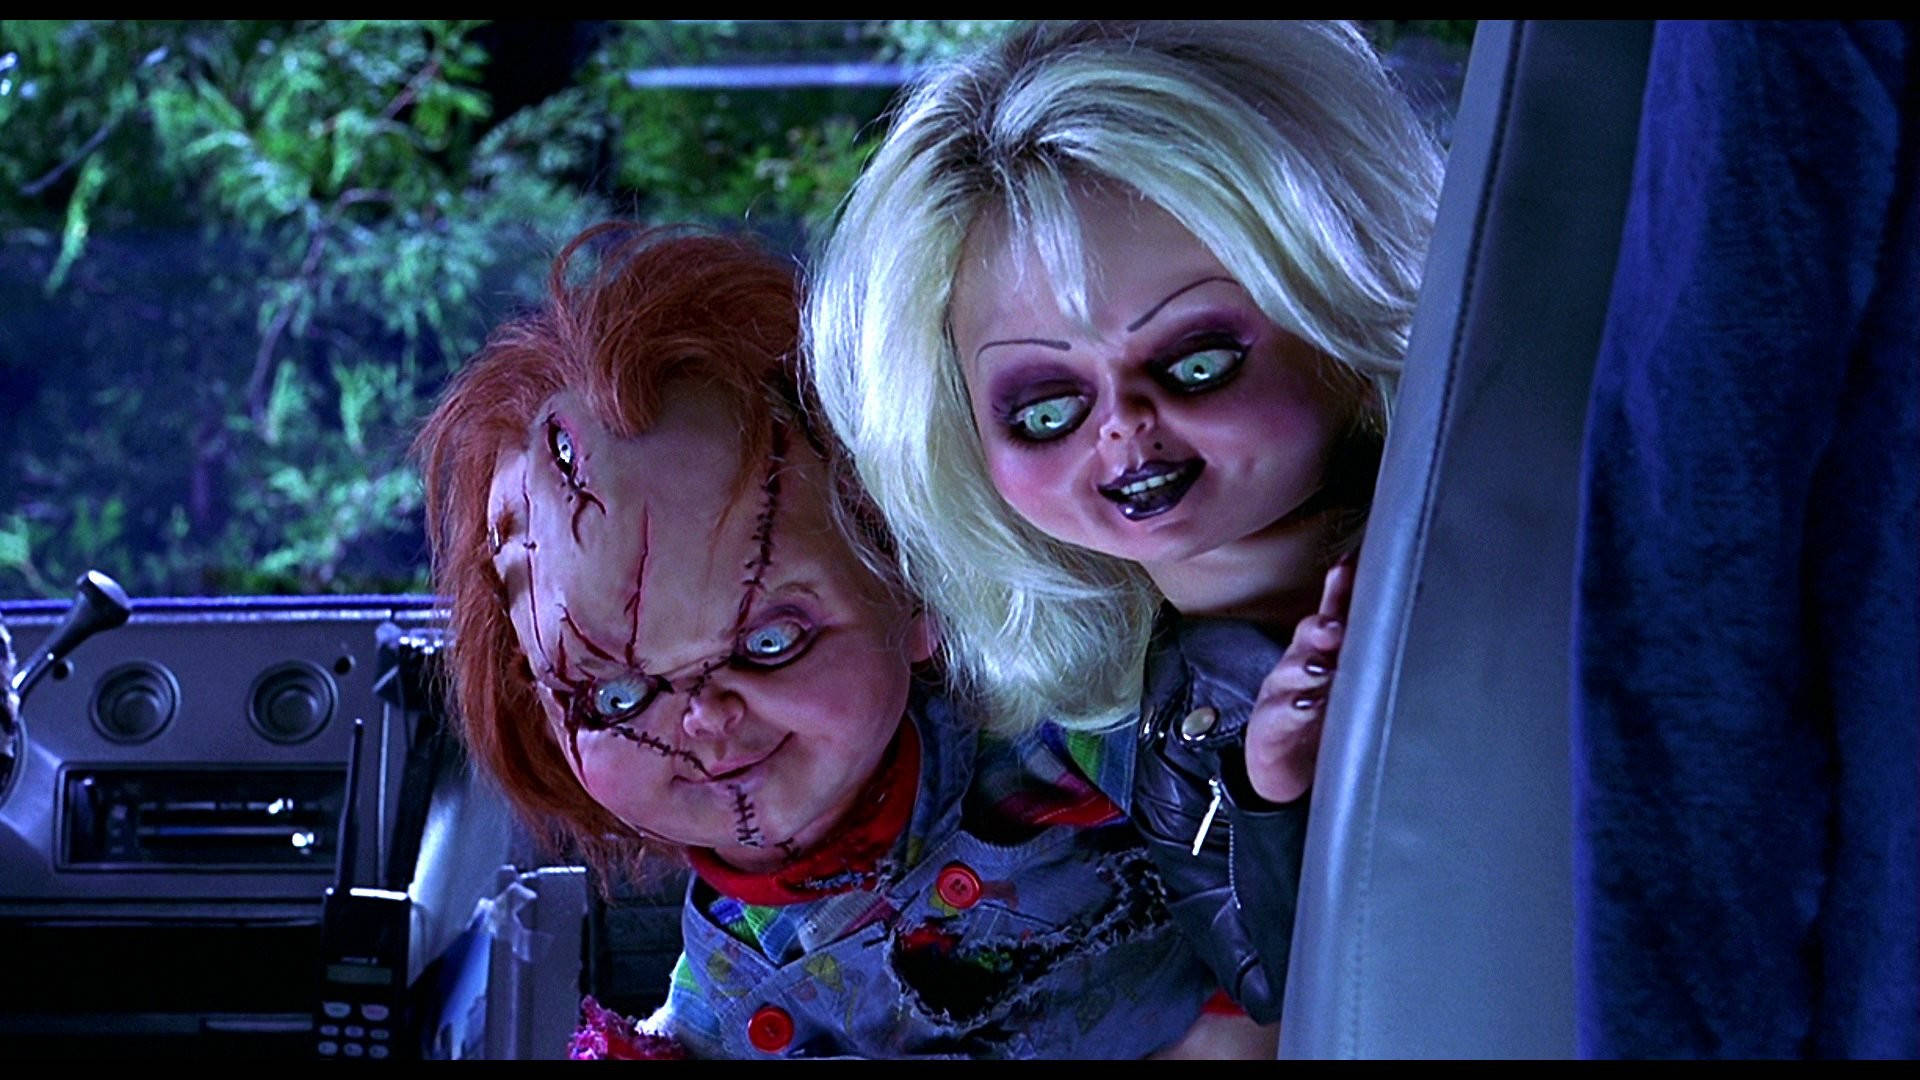 Chucky And Tiffany In Car Wallpaper